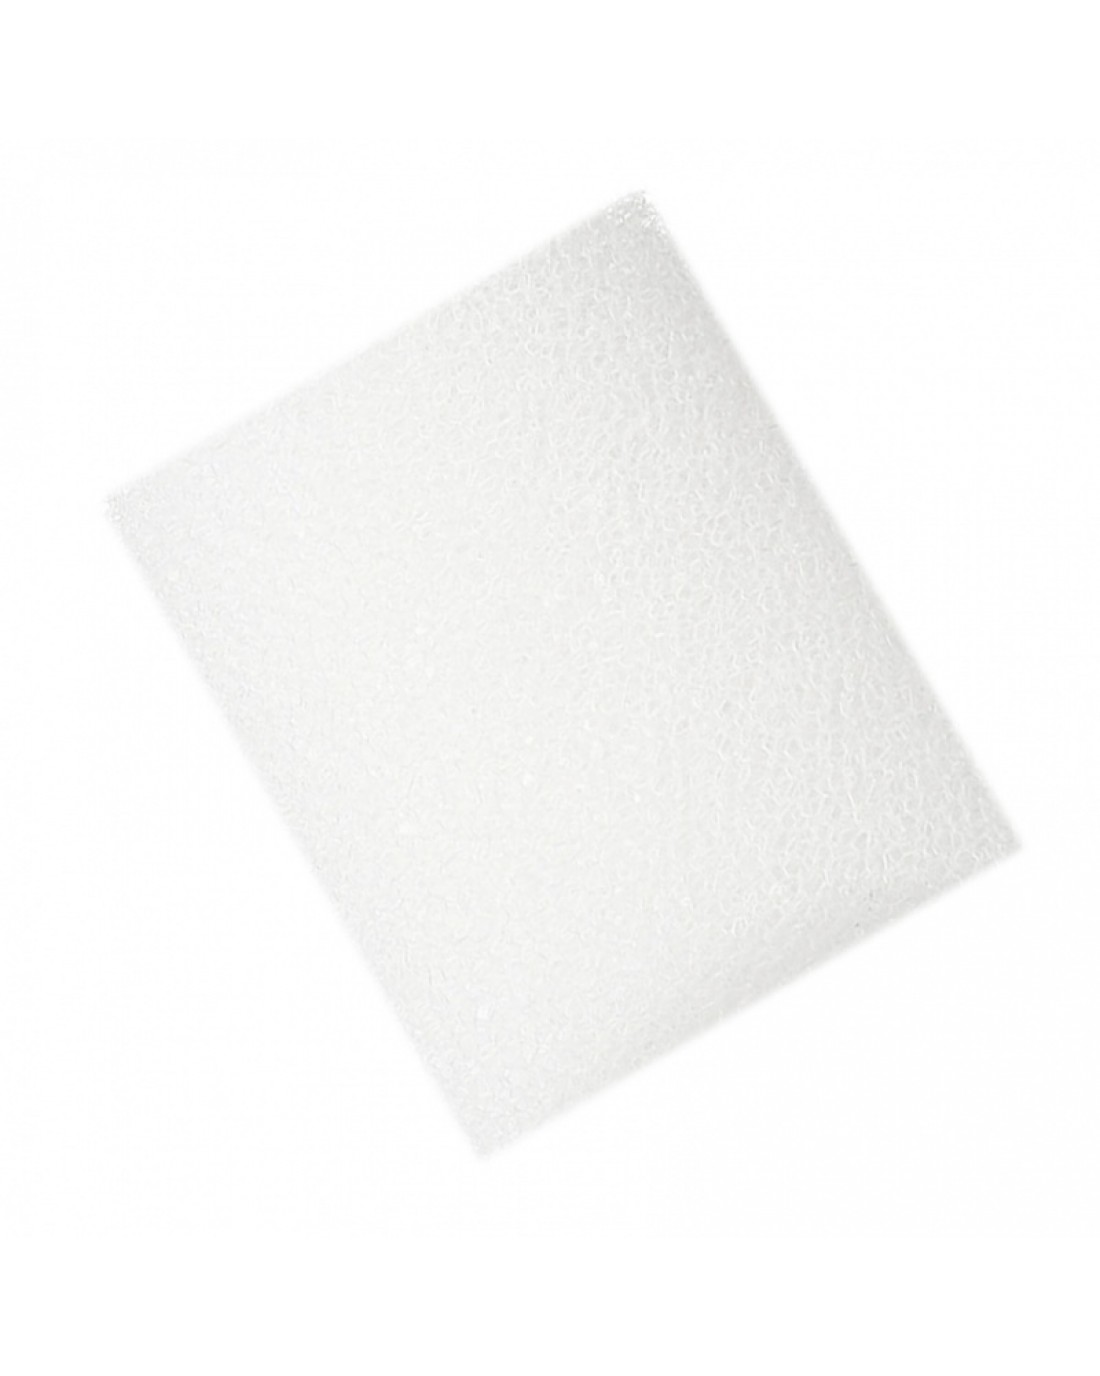 Disposable Ultra Fine Filter for SleepStyle Auto CPAP Machines ...